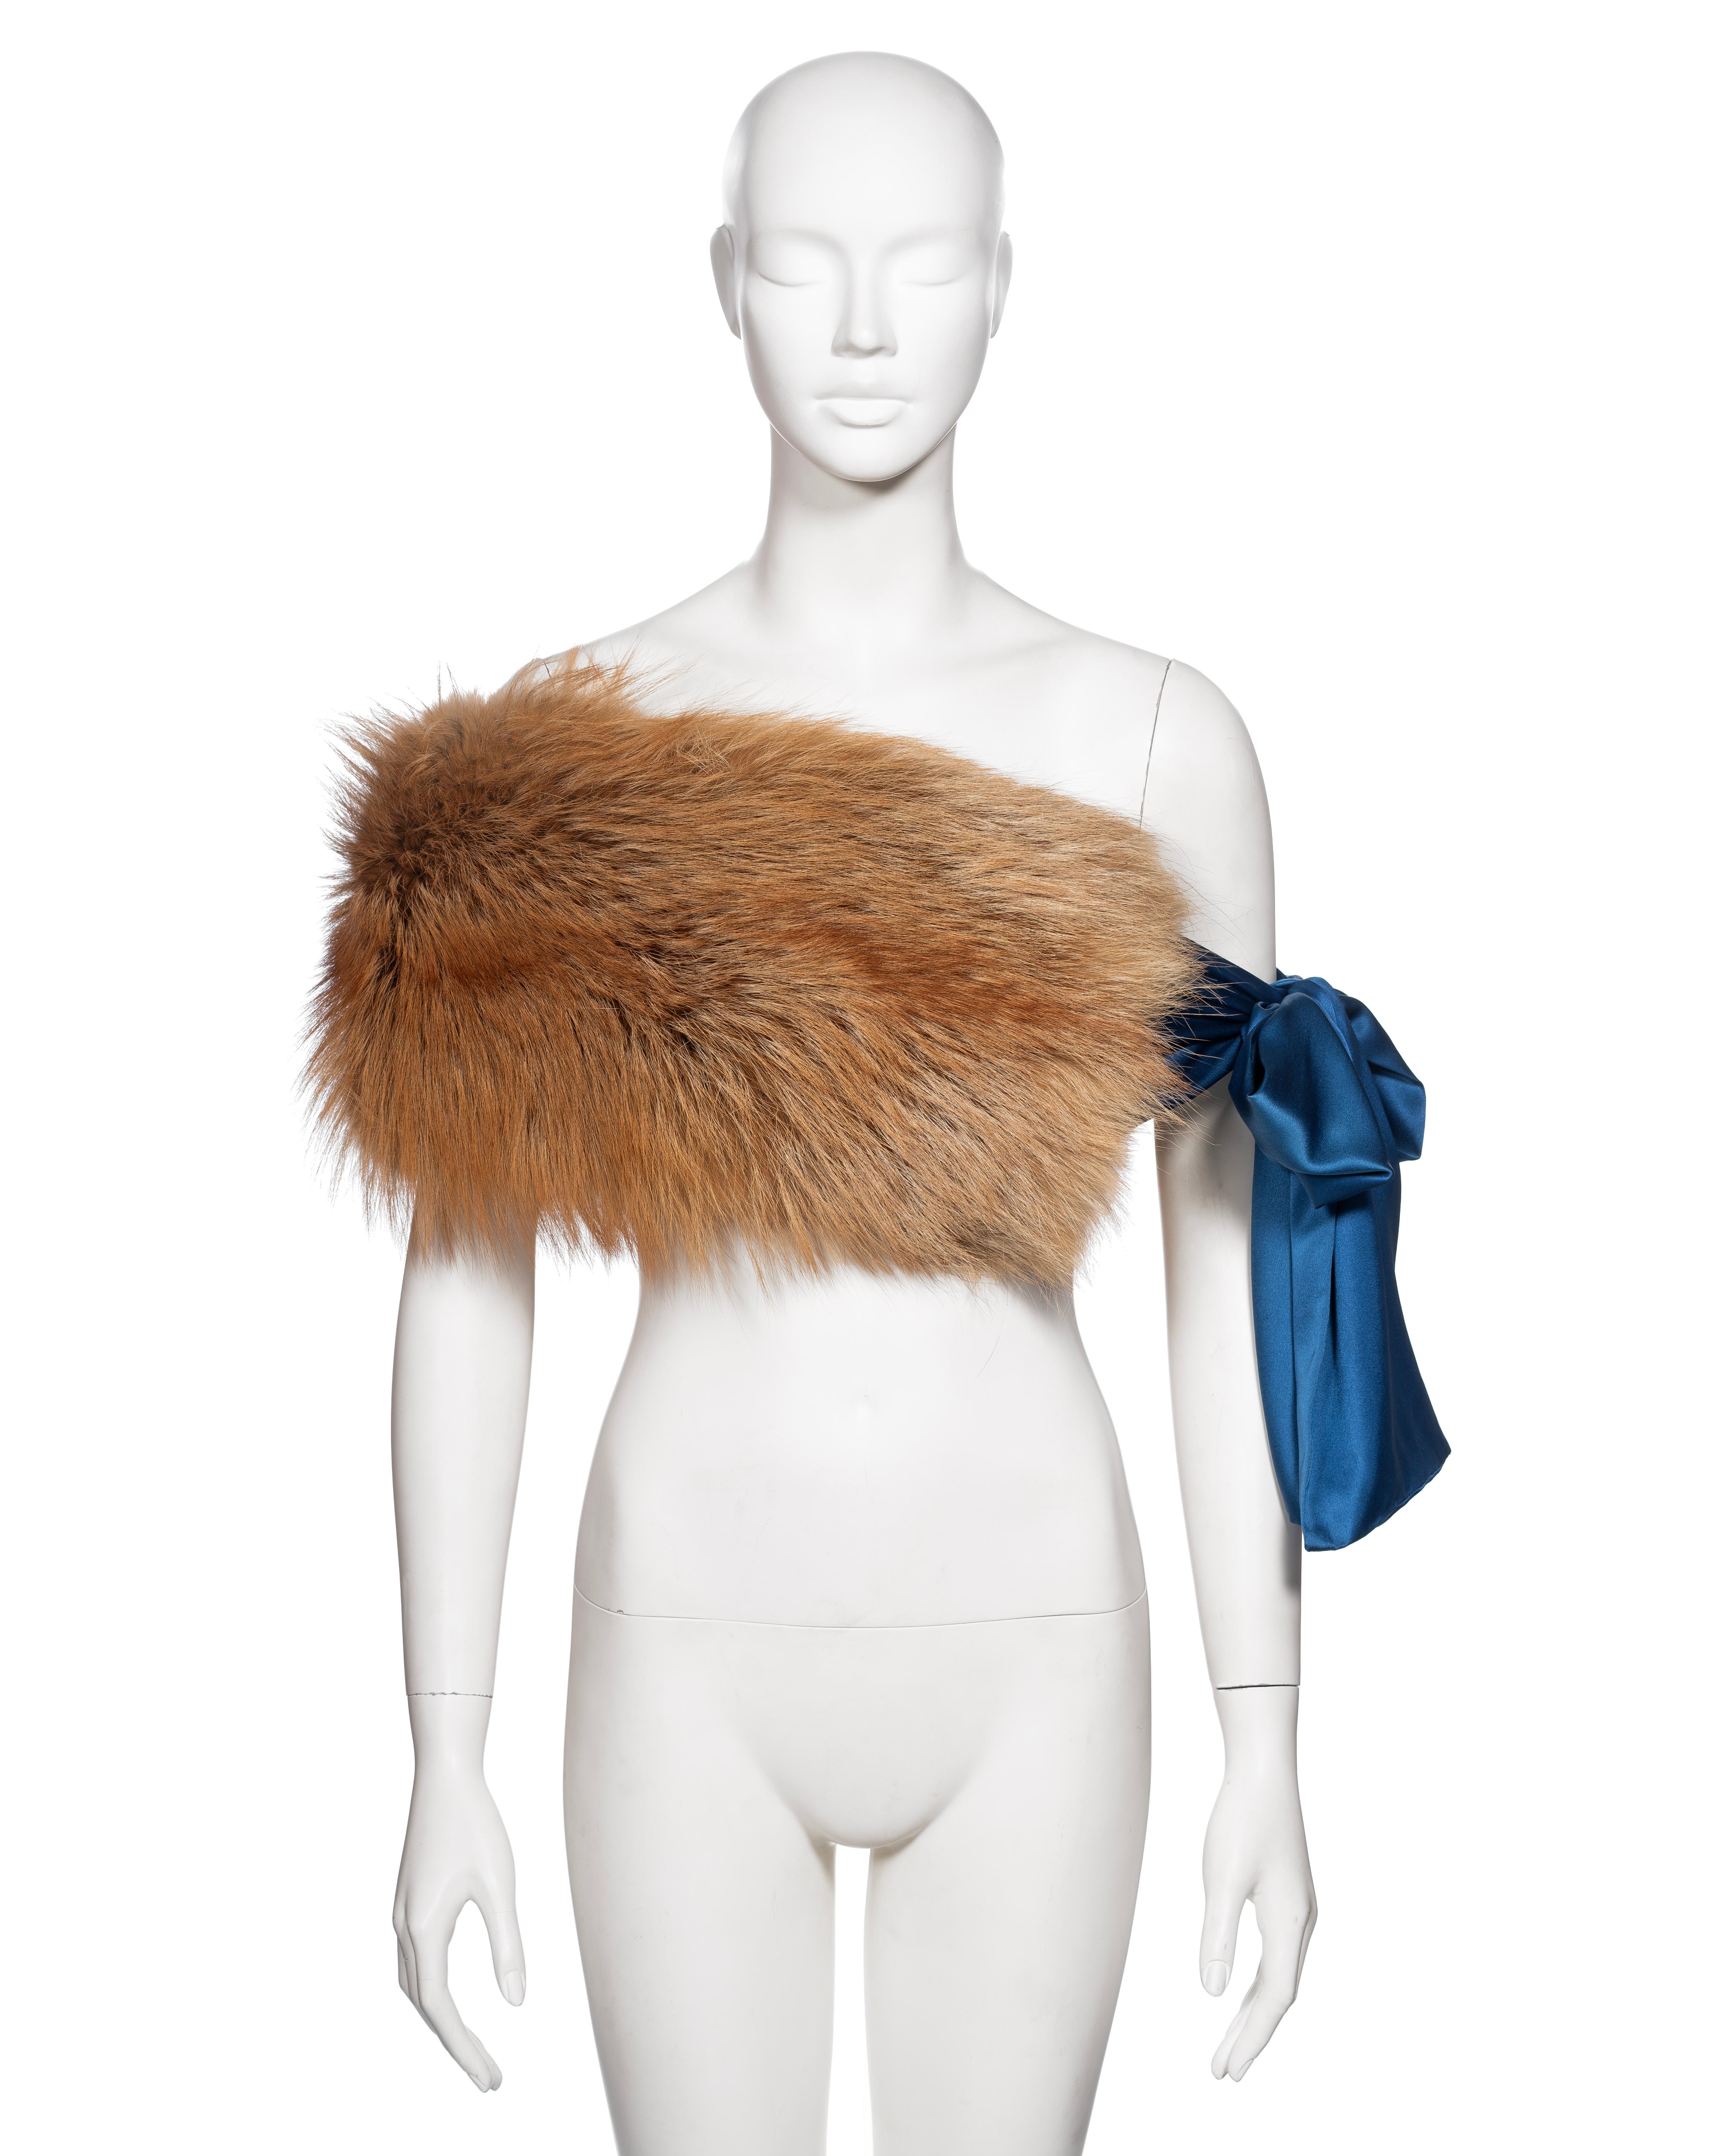 ▪ Archival Yves Saint Laurent Runway Stole
▪ Creative Director: Tom Ford
▪ Fall-Winter 2003
▪ Luxurious golden fox fur
▪ Versatile blue silk ties allow for various styling options
▪ Featured on the runway and in the campaign imagery
▪ Size: One